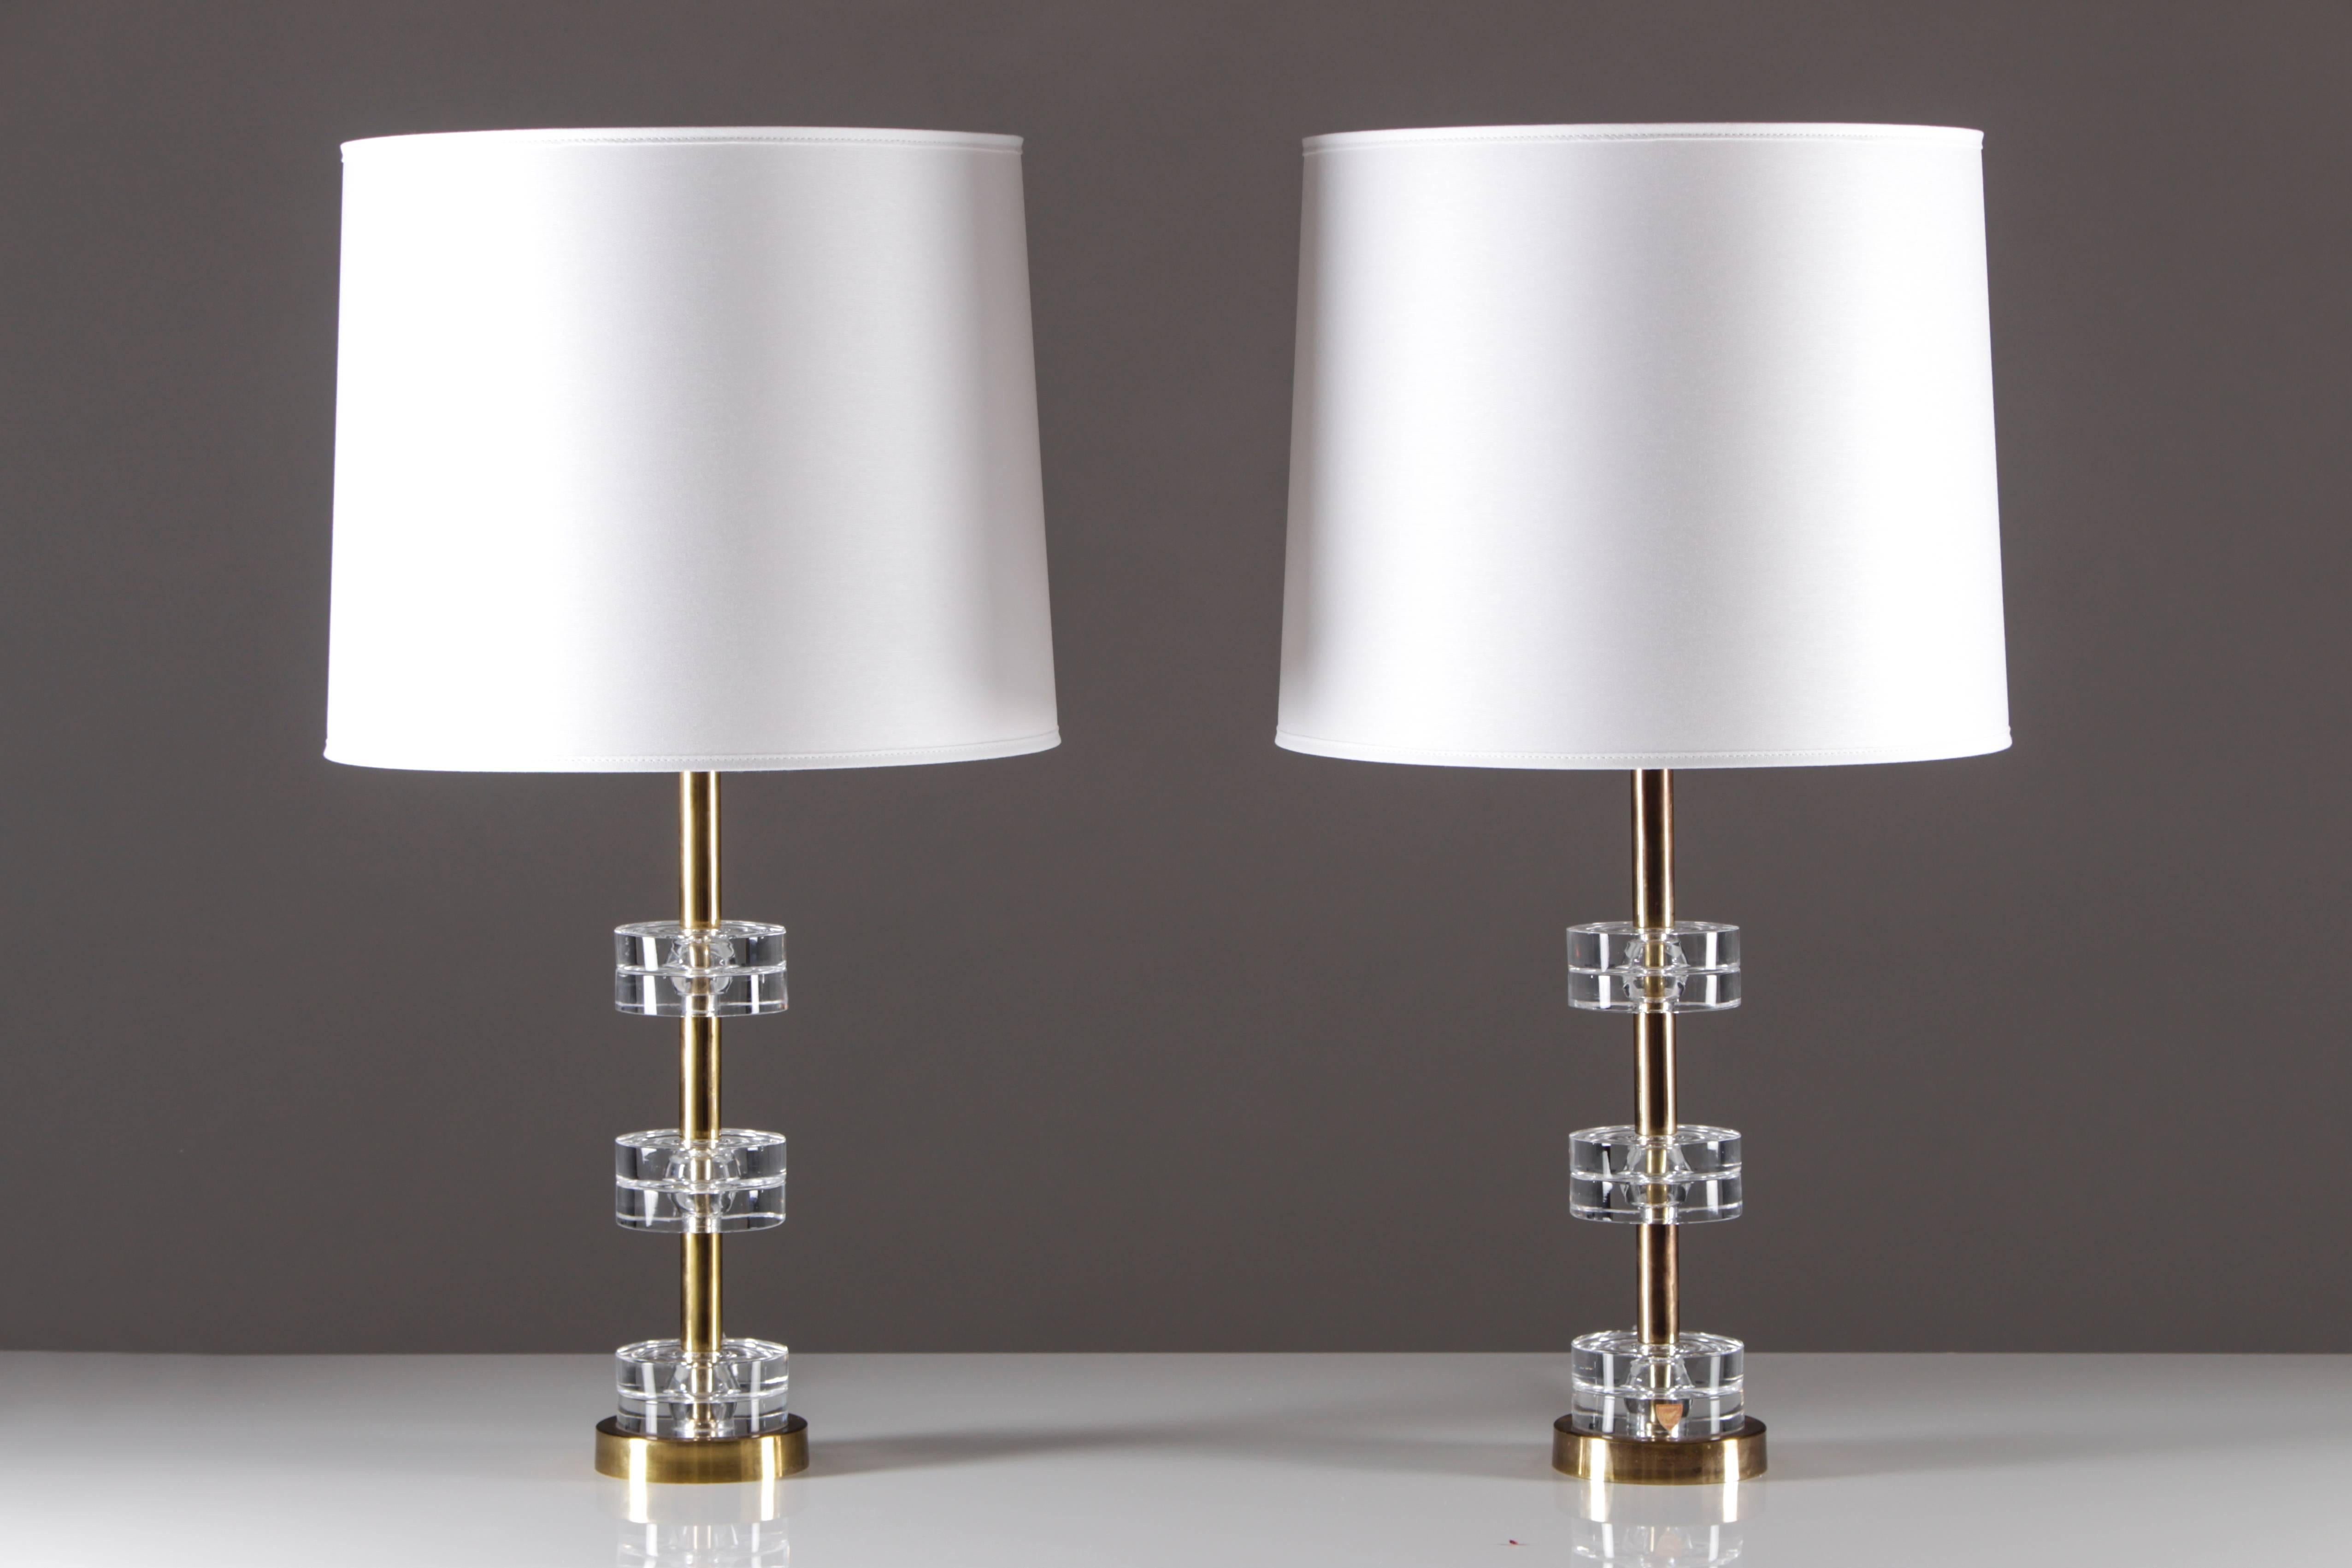 A beautiful pair of Swedish table lamps in brass with glass discs by Carl Fagerlund for Orrefors. The lamps feature six glass discs separated by brass rods. The lamps are in excellent condition with some patina on the brass details. The lamps are